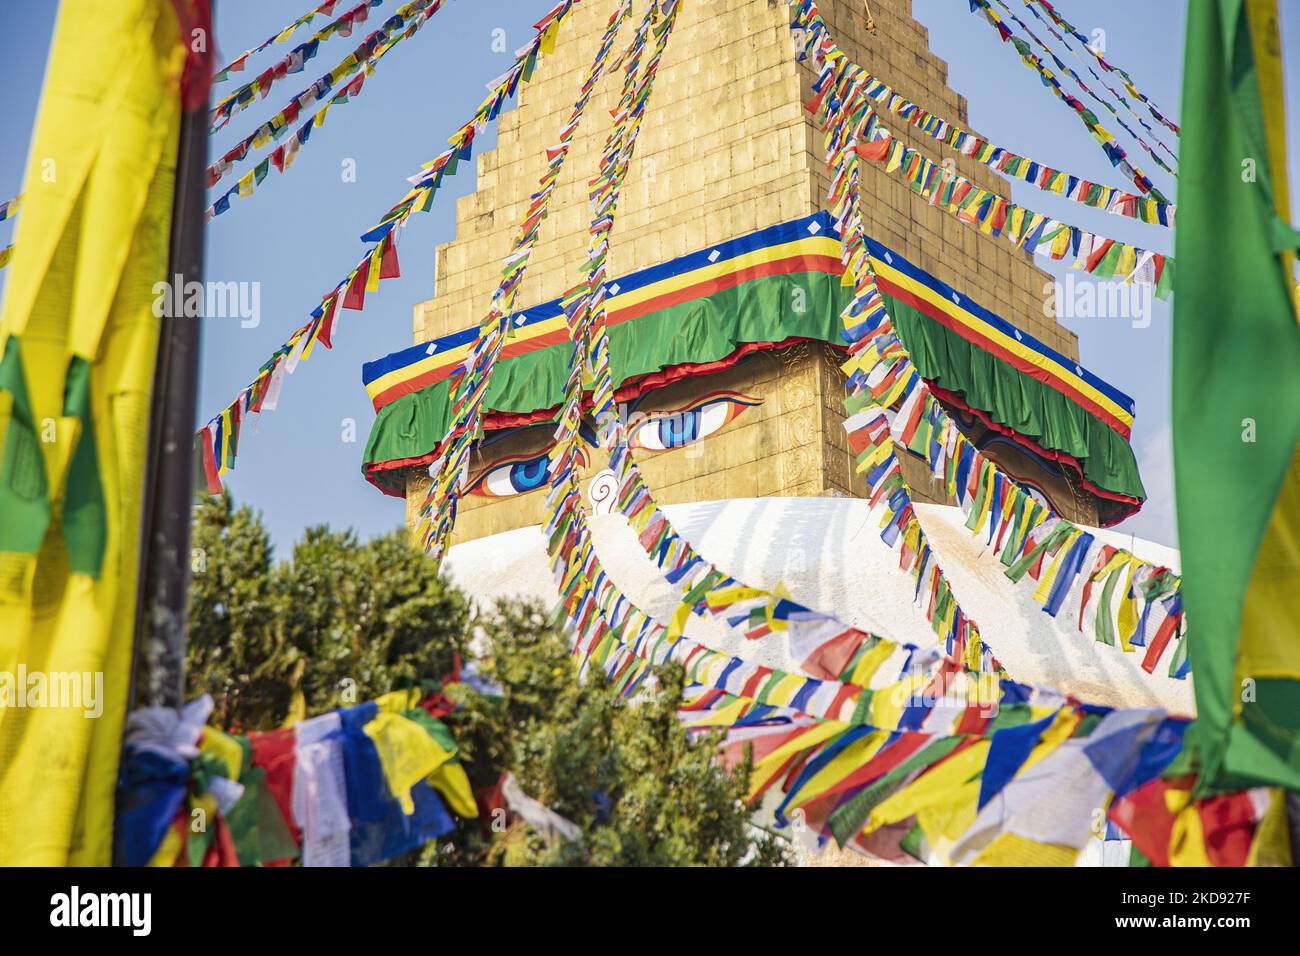 Closeup at the golden top with the Eyes of the stupa, where the praying flags begin. Boudhanath or Bouddha Stupa in Kathmandu a UNESCO World Heritage Site and a legendary place for the Newar and Tibetan Buddhist mythology with the golden part having the Eyes of Boudhanath and the praying flags. One of the most popular tourist attraction in Kathmandu, the mandala makes it one of the largest spherical stupas in Nepal and the world. The Stupa was damaged in the 2015 April earthquake. The Stupa is located on the ancient trade route from Tibet, and the Tibetan Refugees after the 1950s decided to li Stock Photo